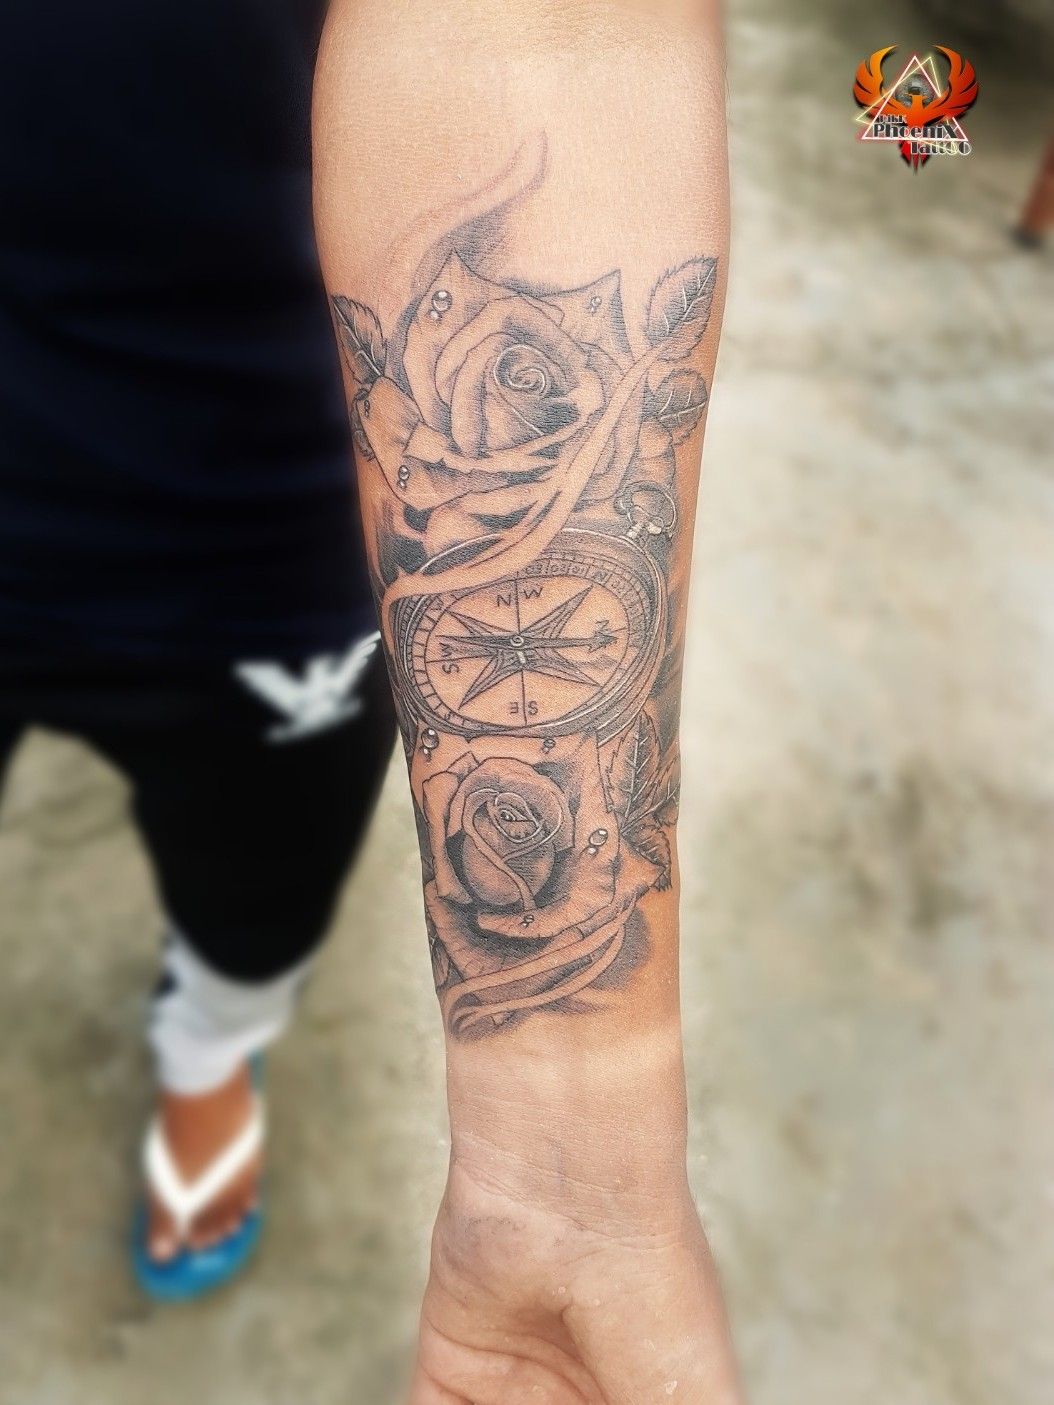 DNS INK tattoo studio Bhopal - [DNS INK tattoo studio Bhopal] [for  appointment-9981253265] 3d art compass tattoo. tattoo for an traveller. [4  hrs.of perfect work]. sharply inked by artist #A_B [amit biswas].